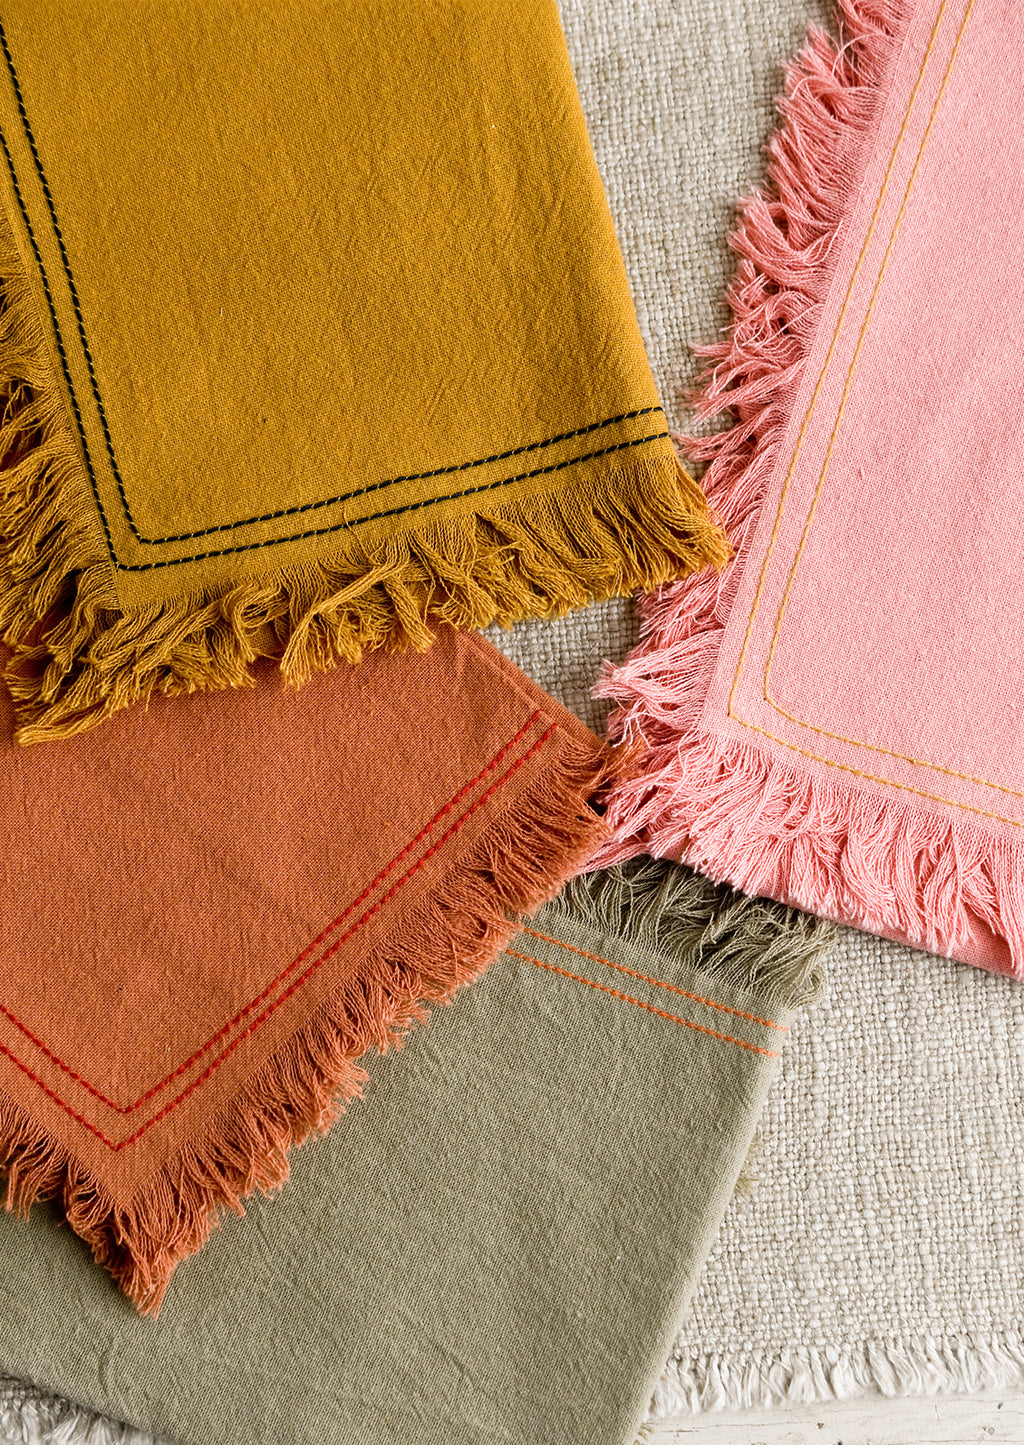 1: Assorted colors of cotton tea towel with contrast stitchings.